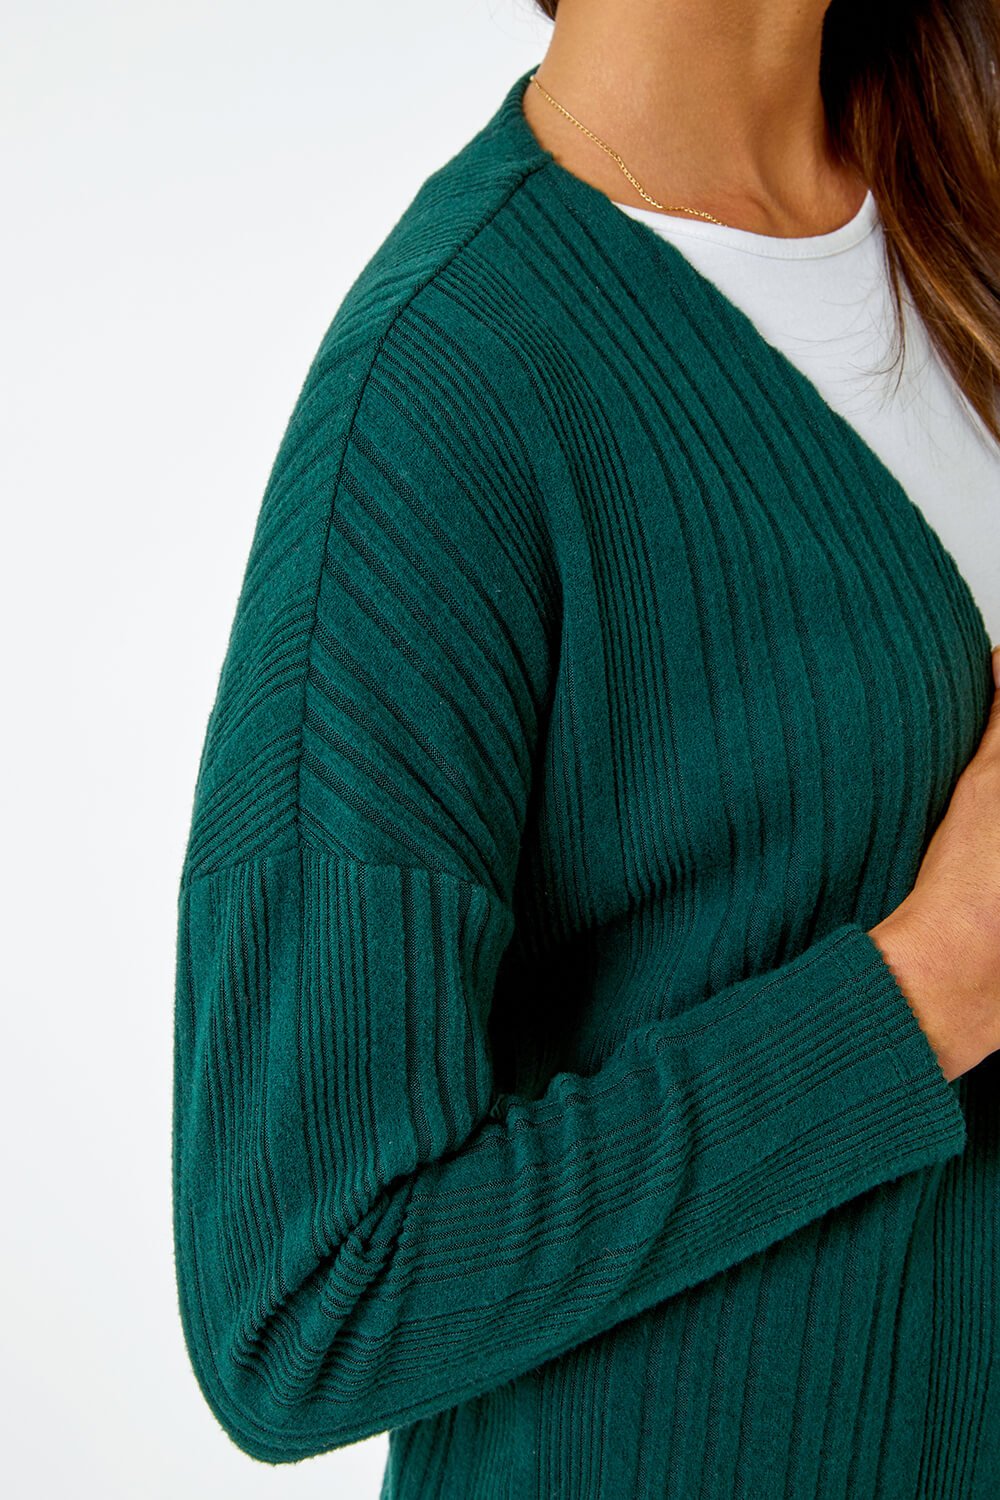 Green Ribbed Longline Stretch Knit Cardigan, Image 5 of 5